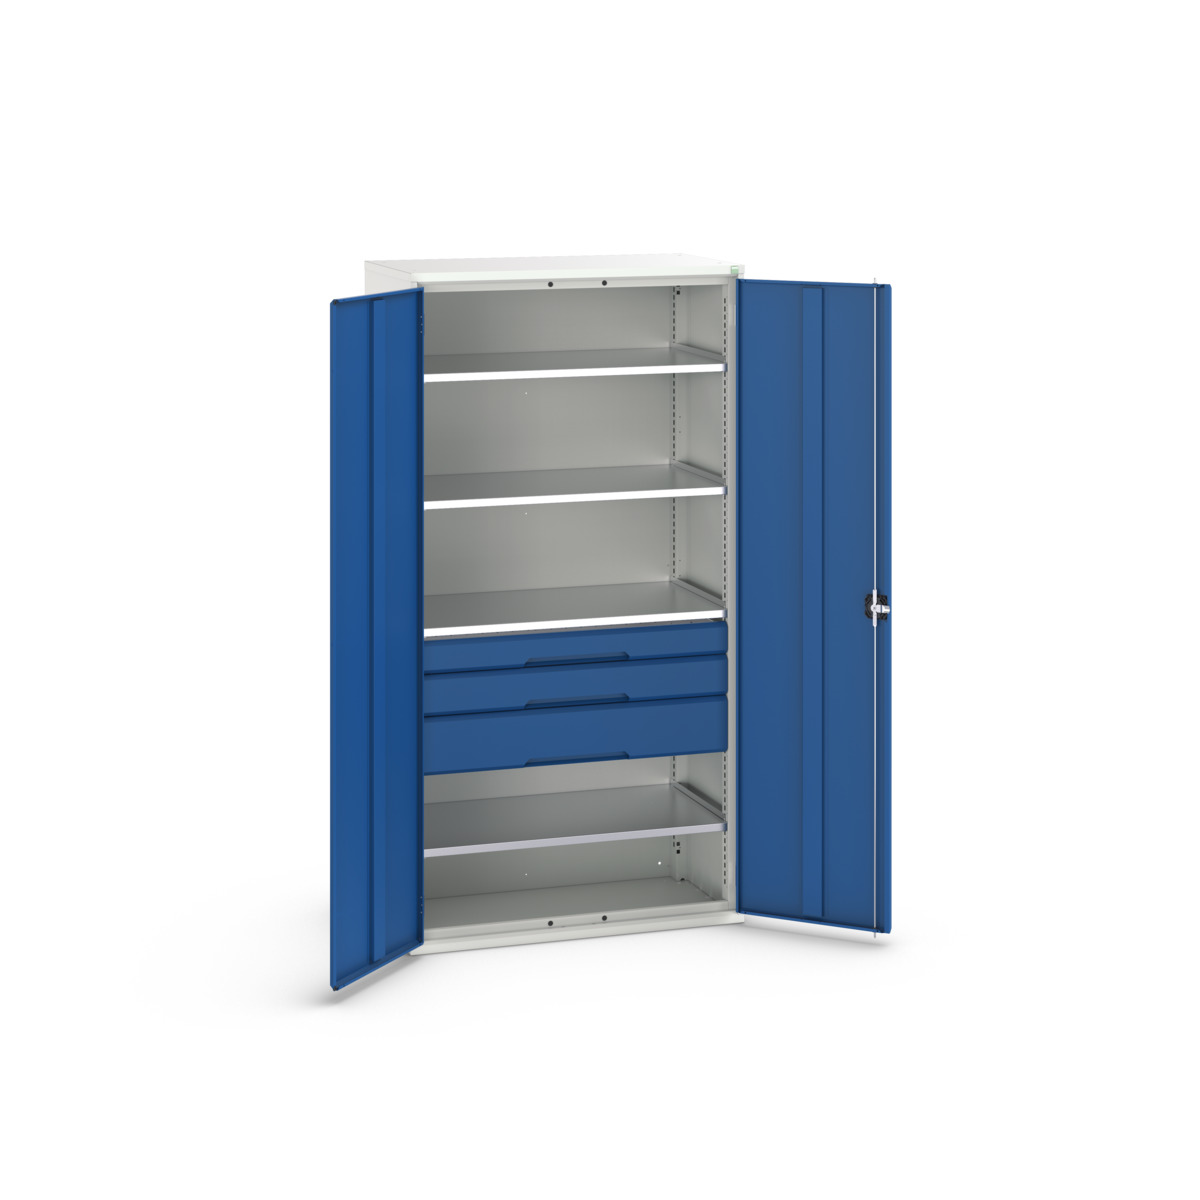 16926575.11 - verso kitted cupboard